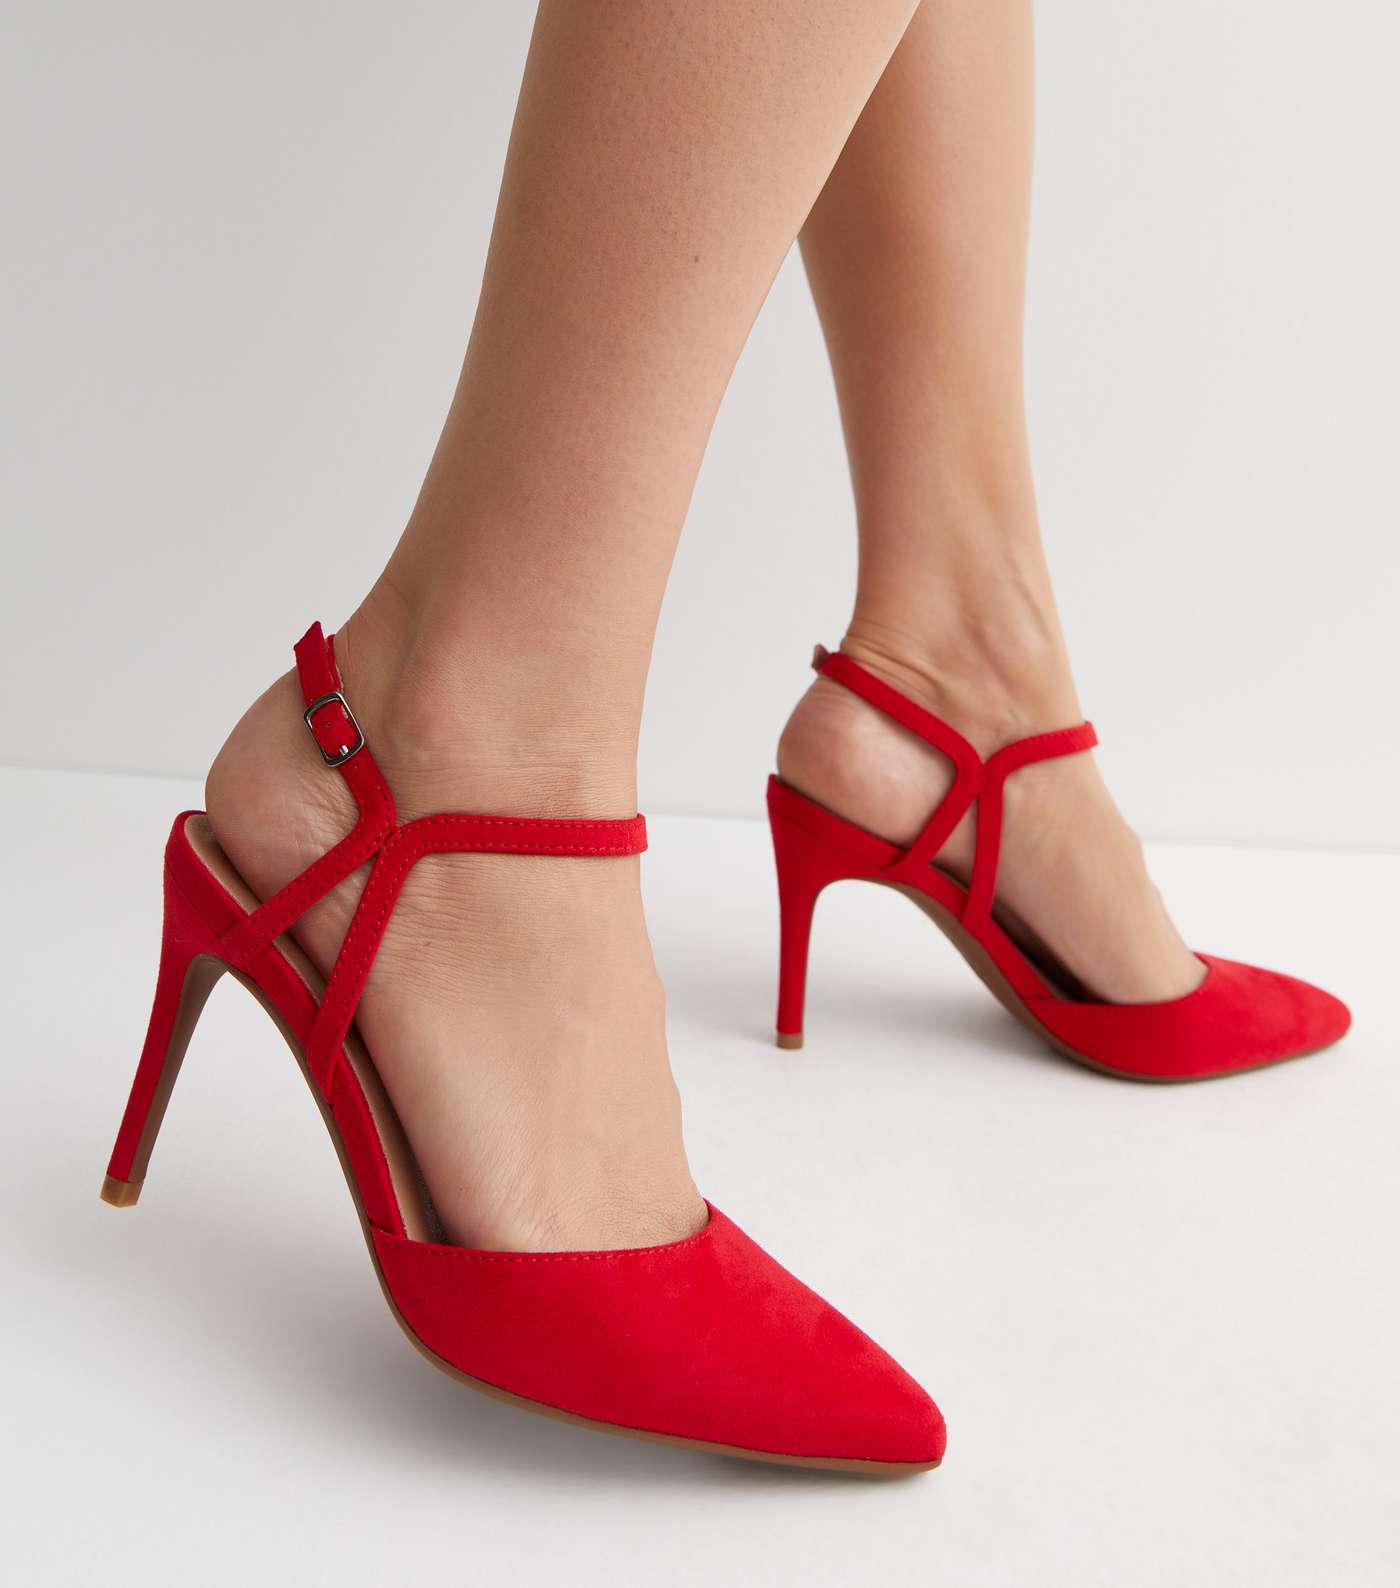 Red Suedette Pointed Toe Stiletto Heel Court Shoes Image 2